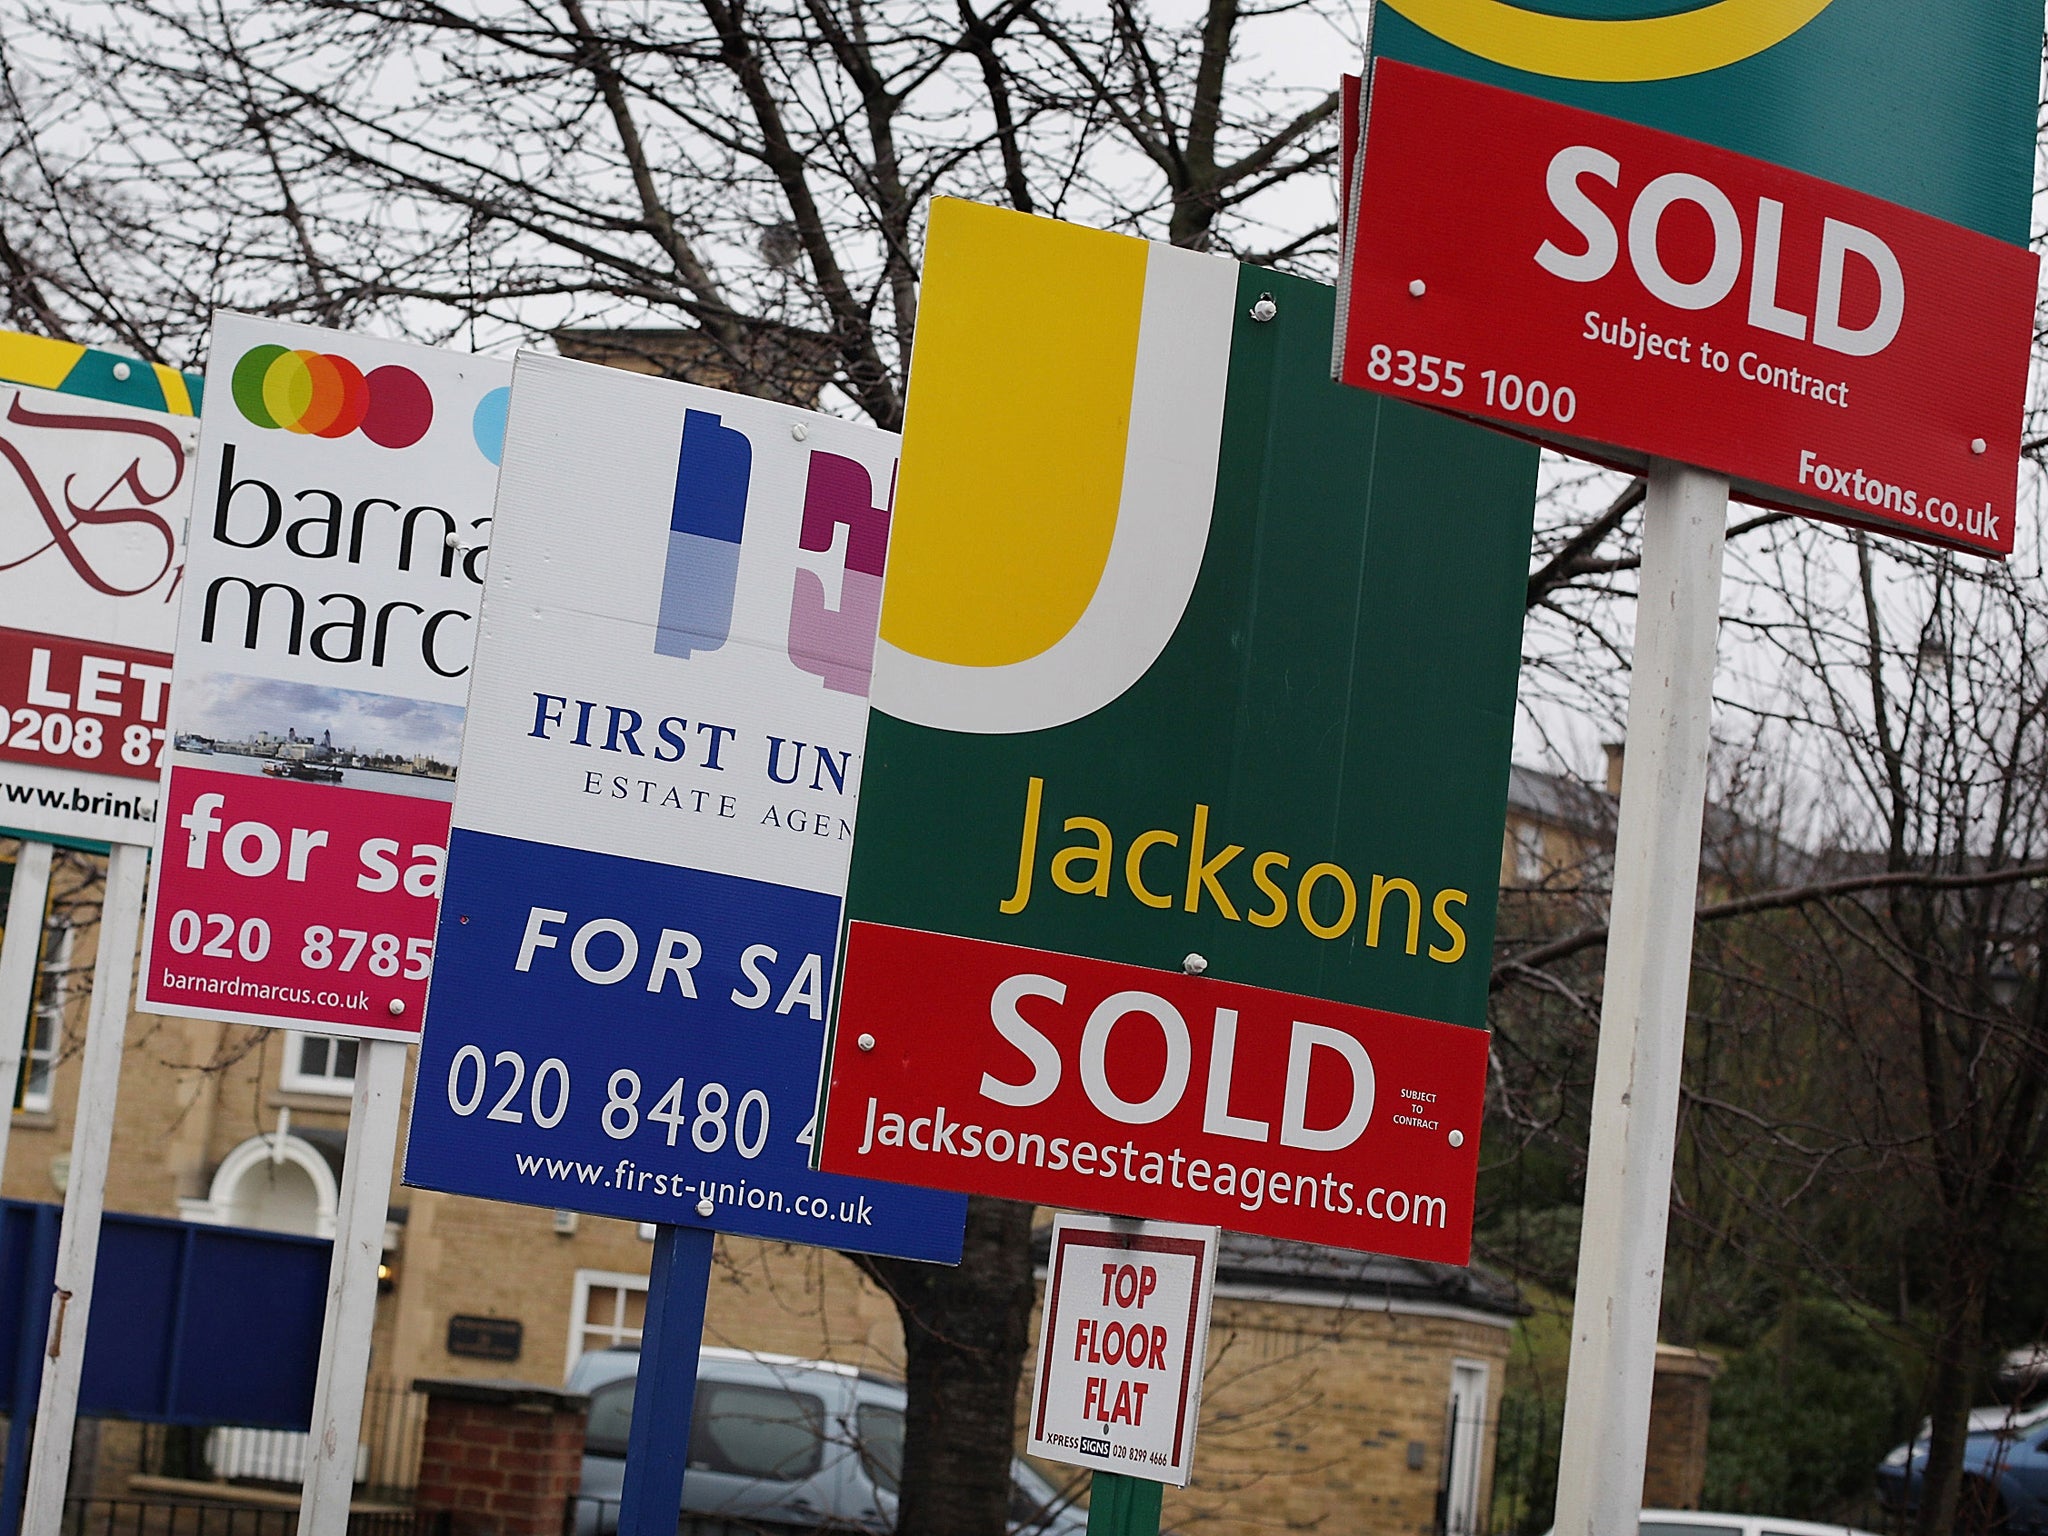 Most people think house prices will continue to rise